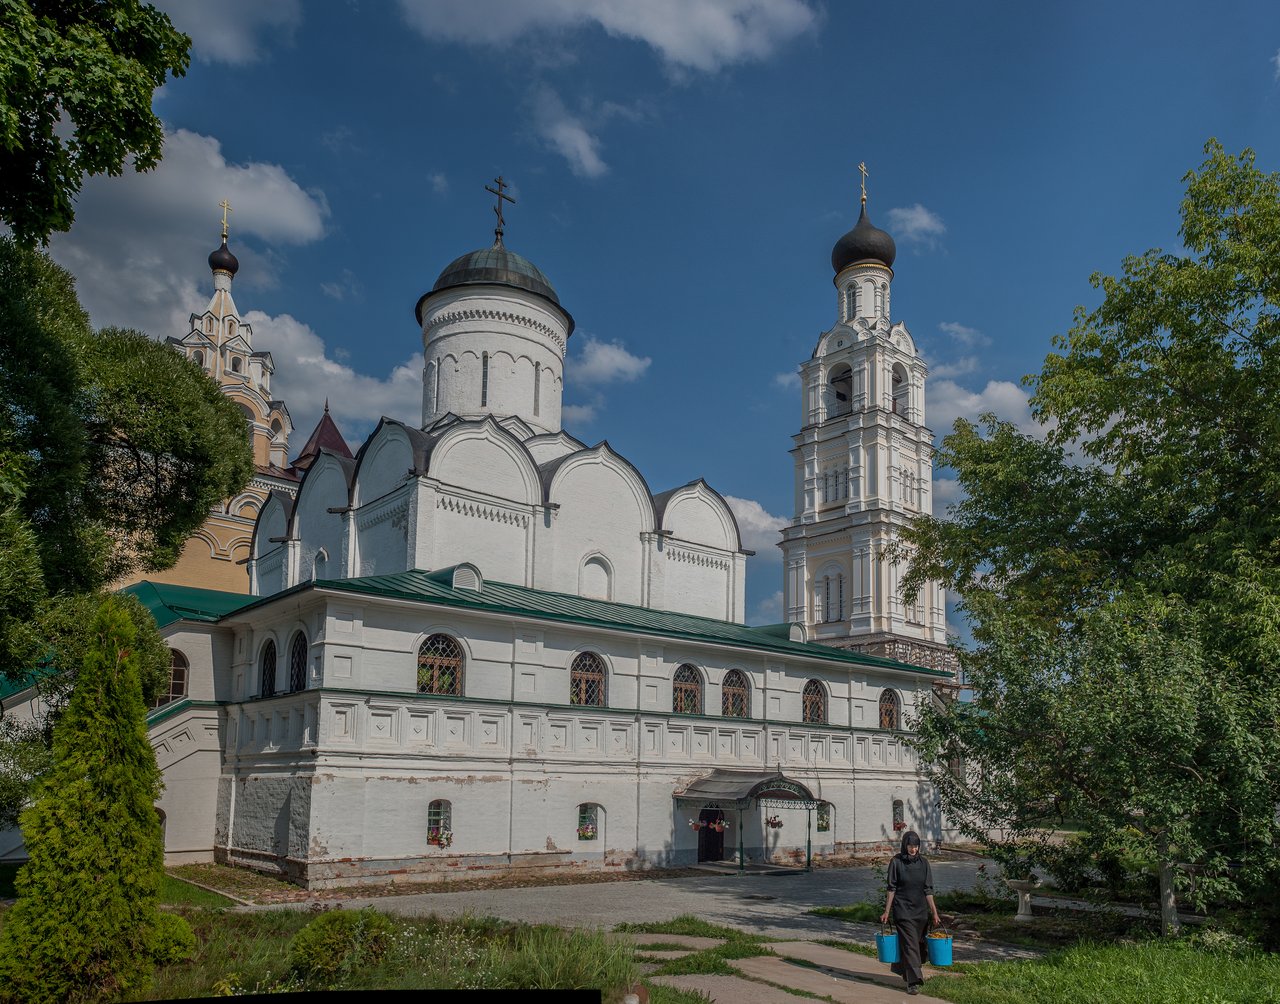 Convent in the town of Kirzhach